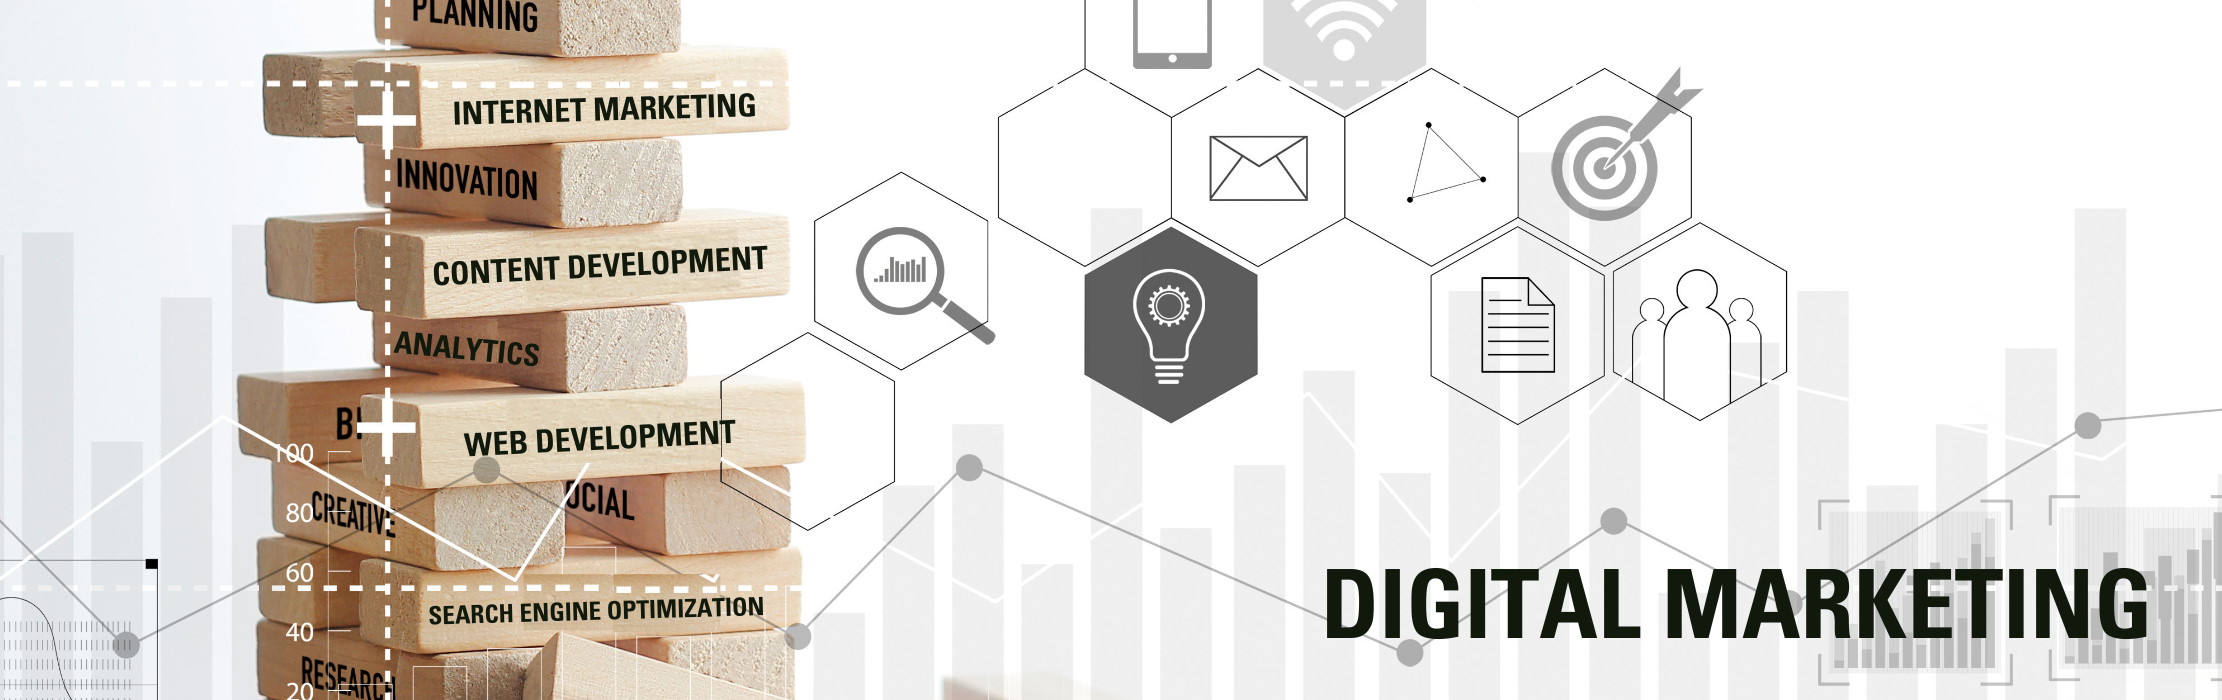 Icons with symbols and wood blocks with terms for Digital Marketing.